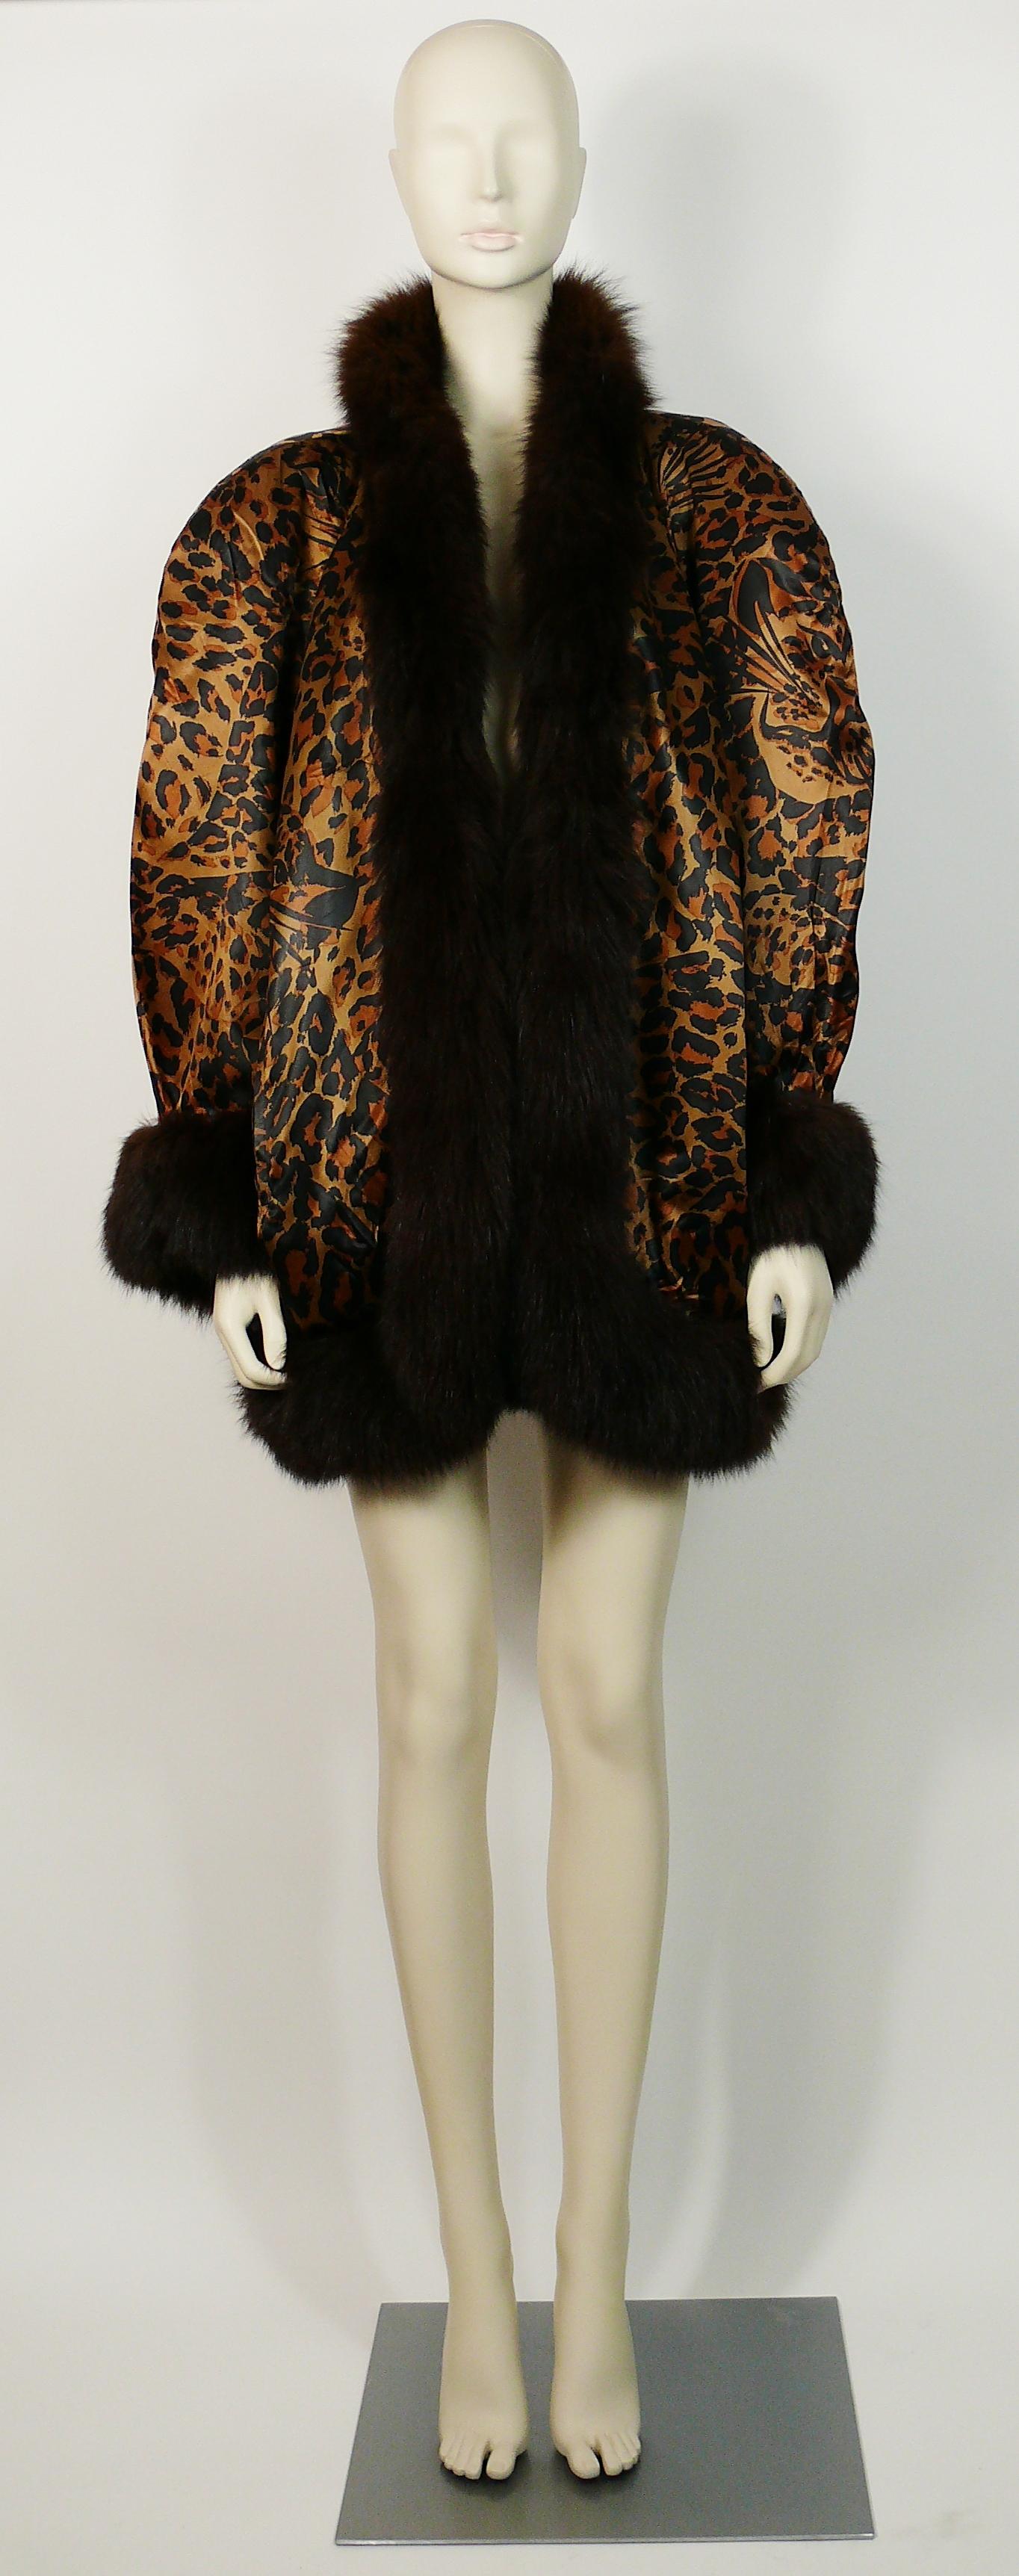 YVES SAINT LAURENT vintage iconic leopard print coat.

This coat features :
- Iconic YVES SAINT LAURENT leopard print exterior with hidden leopard faces.
- Brown fur trim.
- Exagerated padded shoulders.
- No closure.
- Two pockets.
- Black quilted